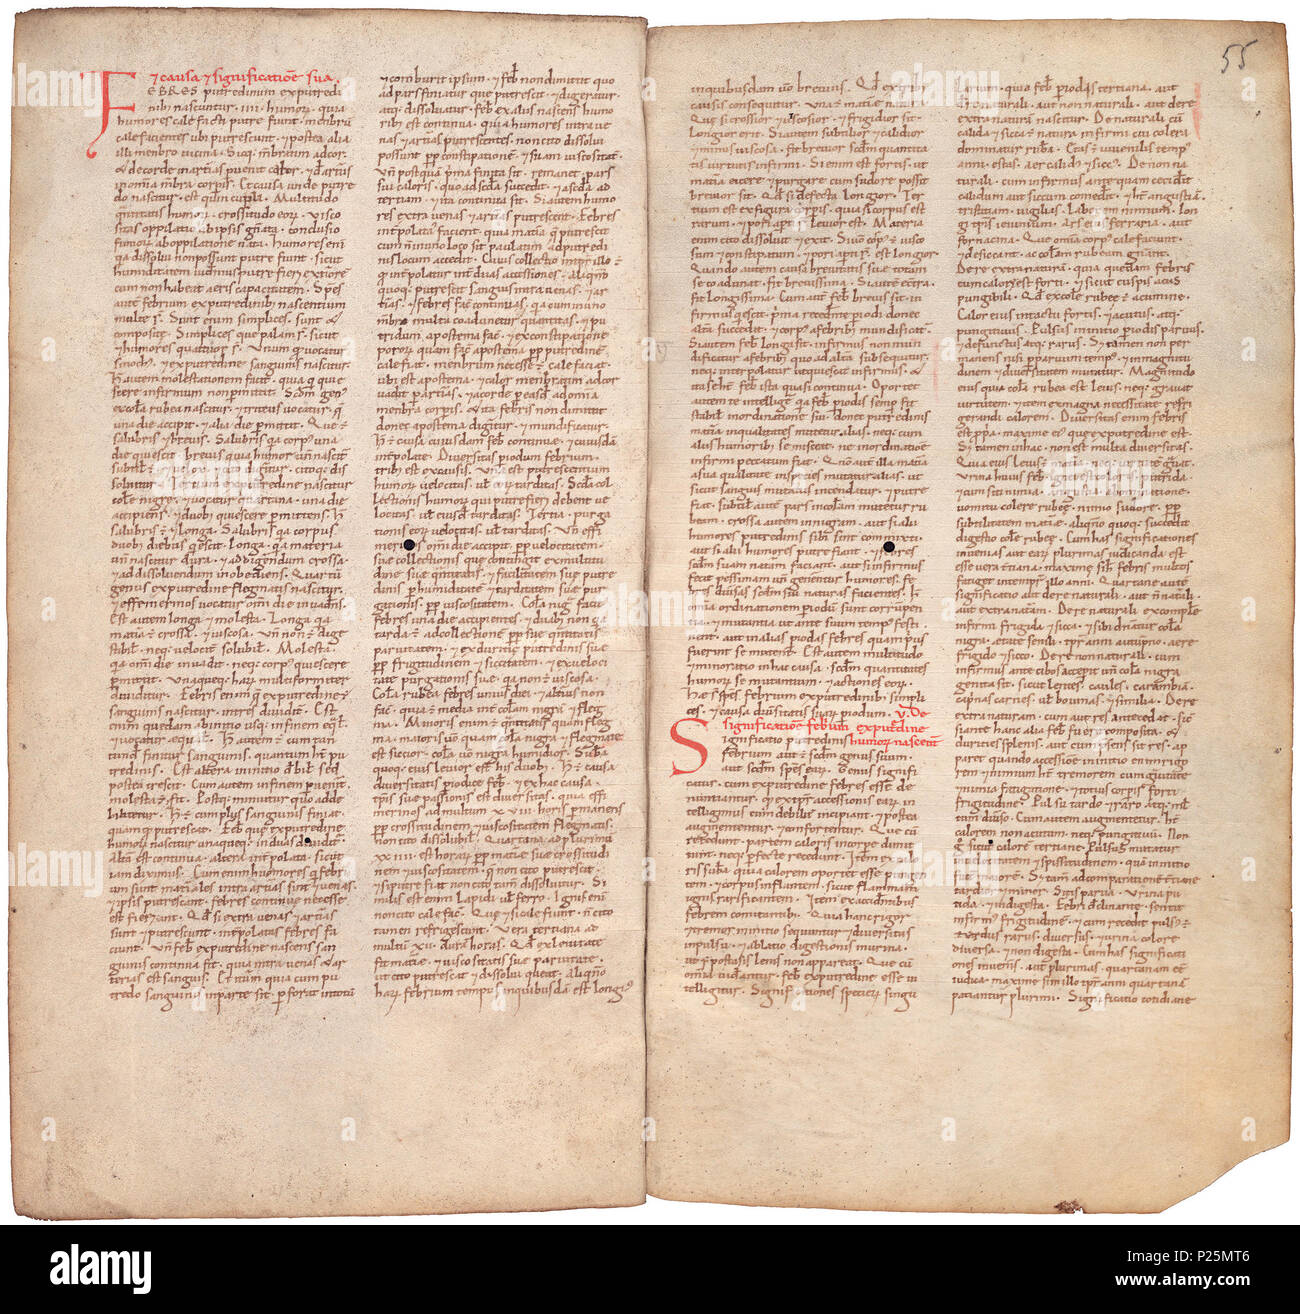 . Pantegni pars prima theorica (lib. I-X) - folios 054v (left) and 055r (right)  .  Lefthand side folio 054v; righthand side folio 055r from an 11th century copy of the Liber pantegni. This is the earliest known copy (prior to 1086) of the Liber pantegni, made at Monte Cassino under the supervision of Constantine the African. It is dedicated to Abbot Desiderius of Monte Cassino (1027-1087), before he became Pope Victor III. Read backgroud information in Dutch and in English. . Constantine the African (ca. 1010-1098/9) 176 Liber pantegni - KB 73 J 6 - folios 054v (left) and 055r (right) Stock Photo